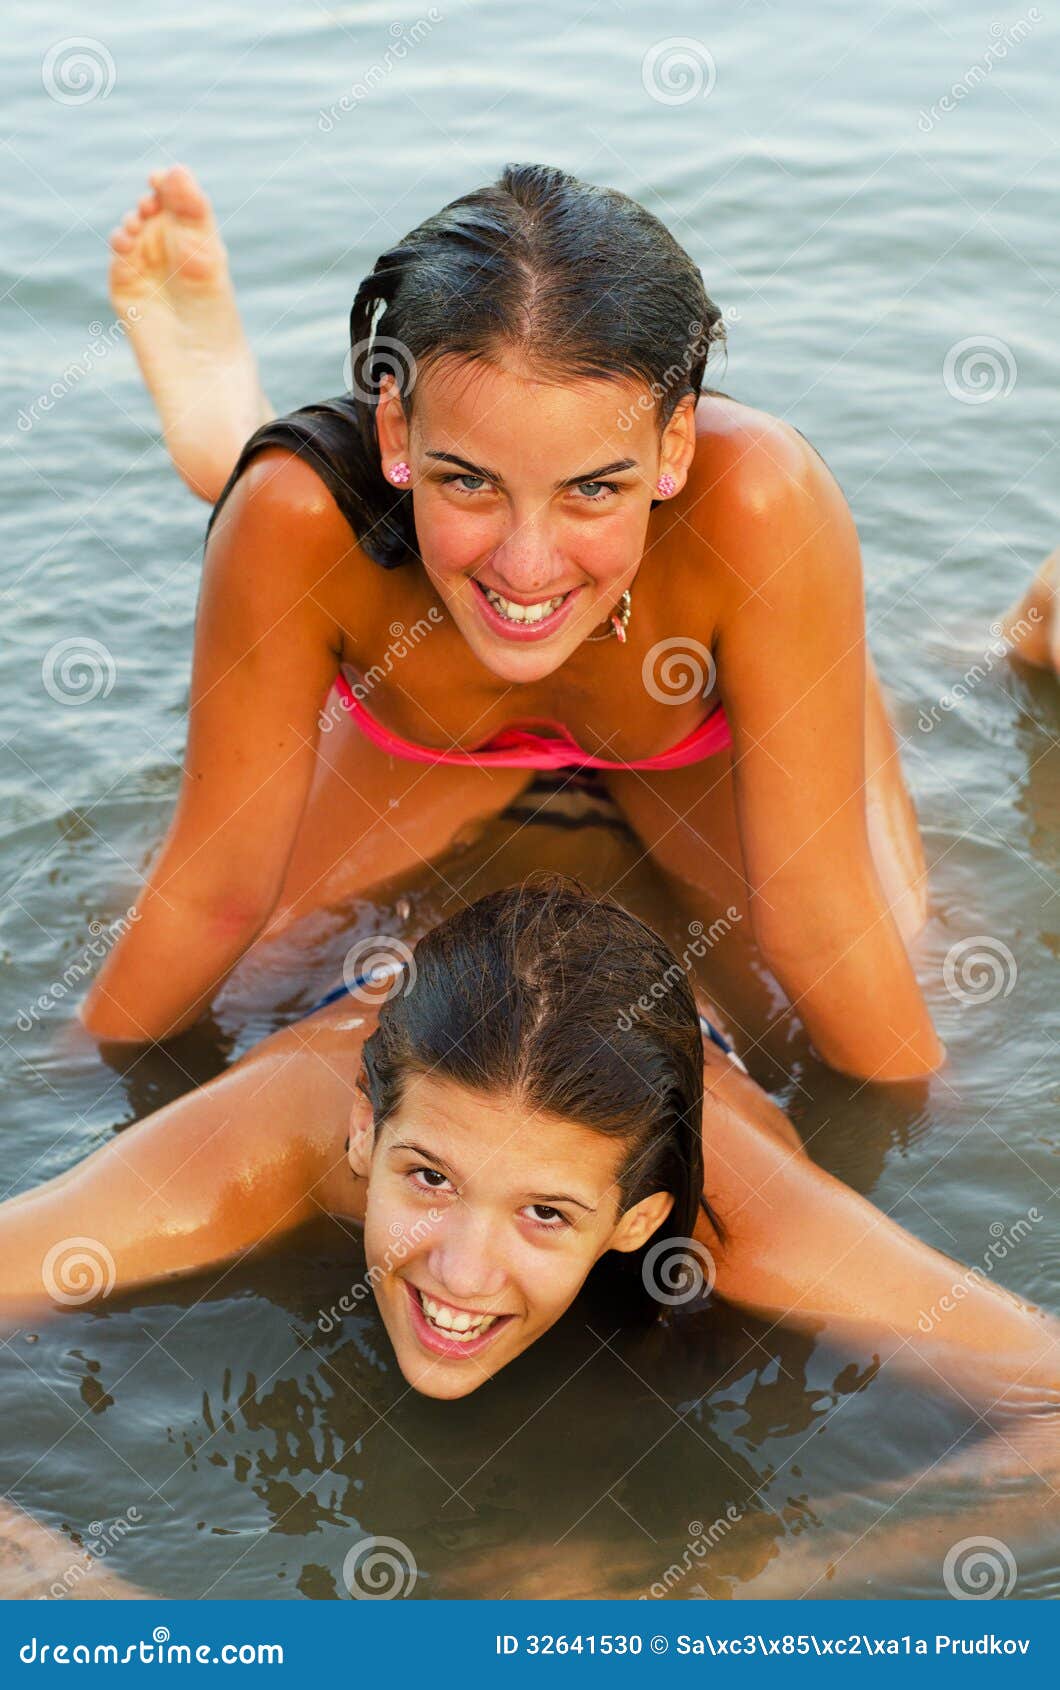 Young Girls Having Fun With